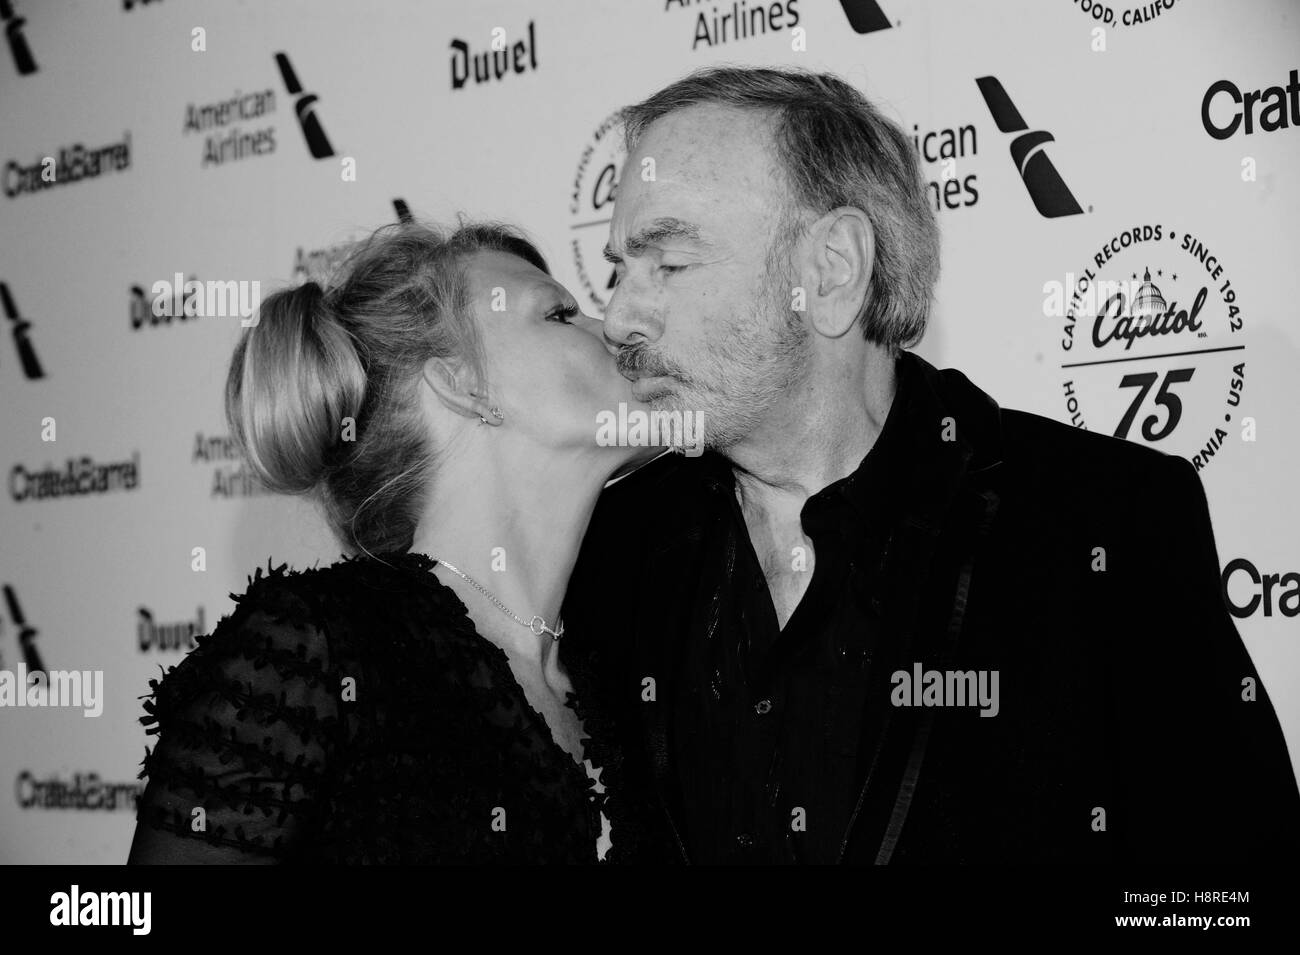 Los Angeles, USA. 15th November 2016.Musician Neil Diamond and Katie McNeil kissing at the Hollywood Gala celebrating Capitol Records 75th Anniversary on November 15, 2016 in Los Angeles, California.(Digitally altered black and white) © The Photo Access/A Stock Photo